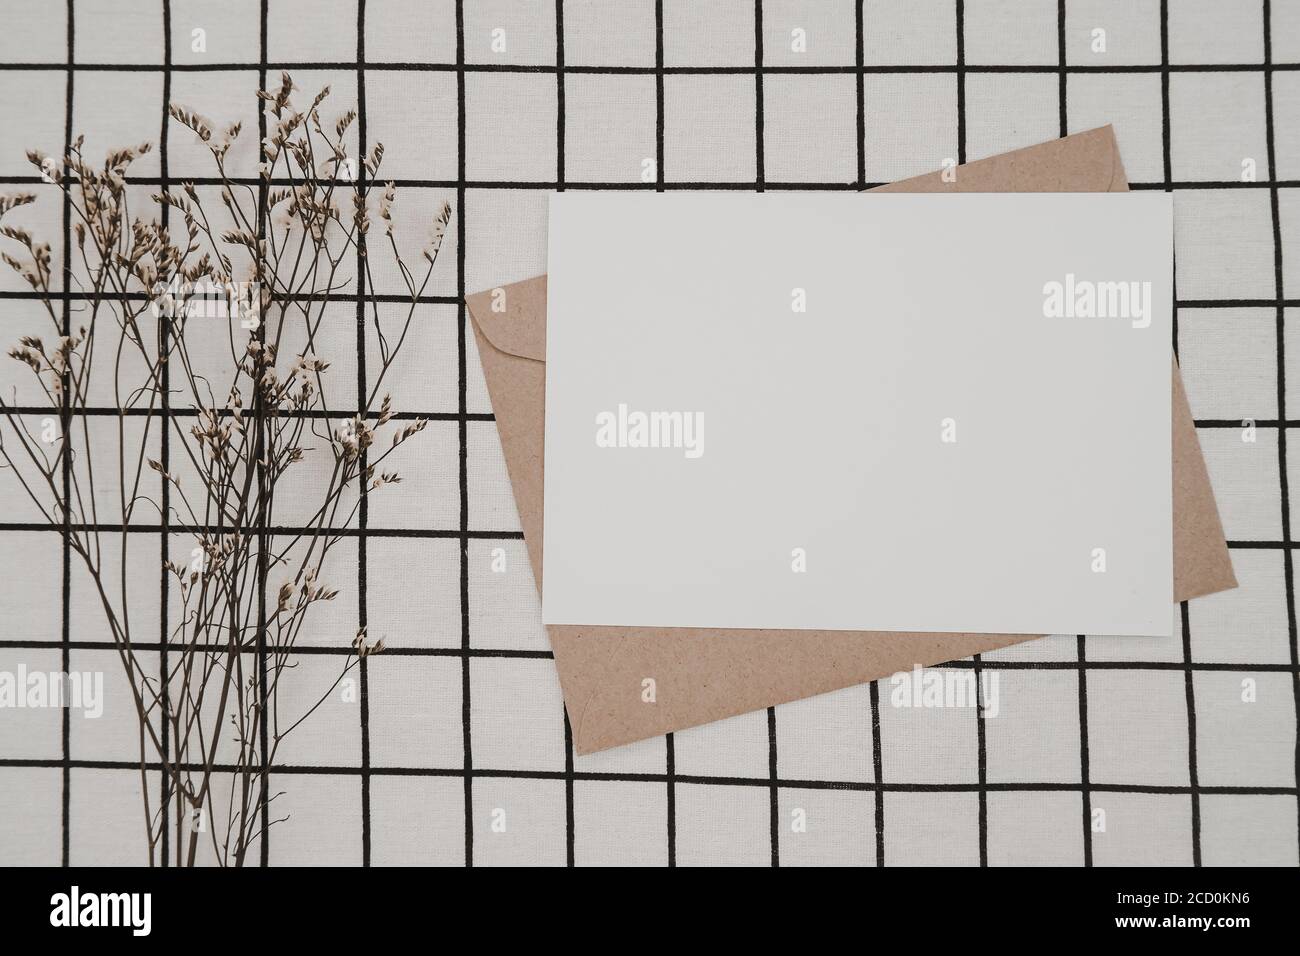 Blank white paper on brown paper envelope with Limonium dry flower and Carton box on White cloth with Black grid pattern. Mock-up of horizontal blank Stock Photo